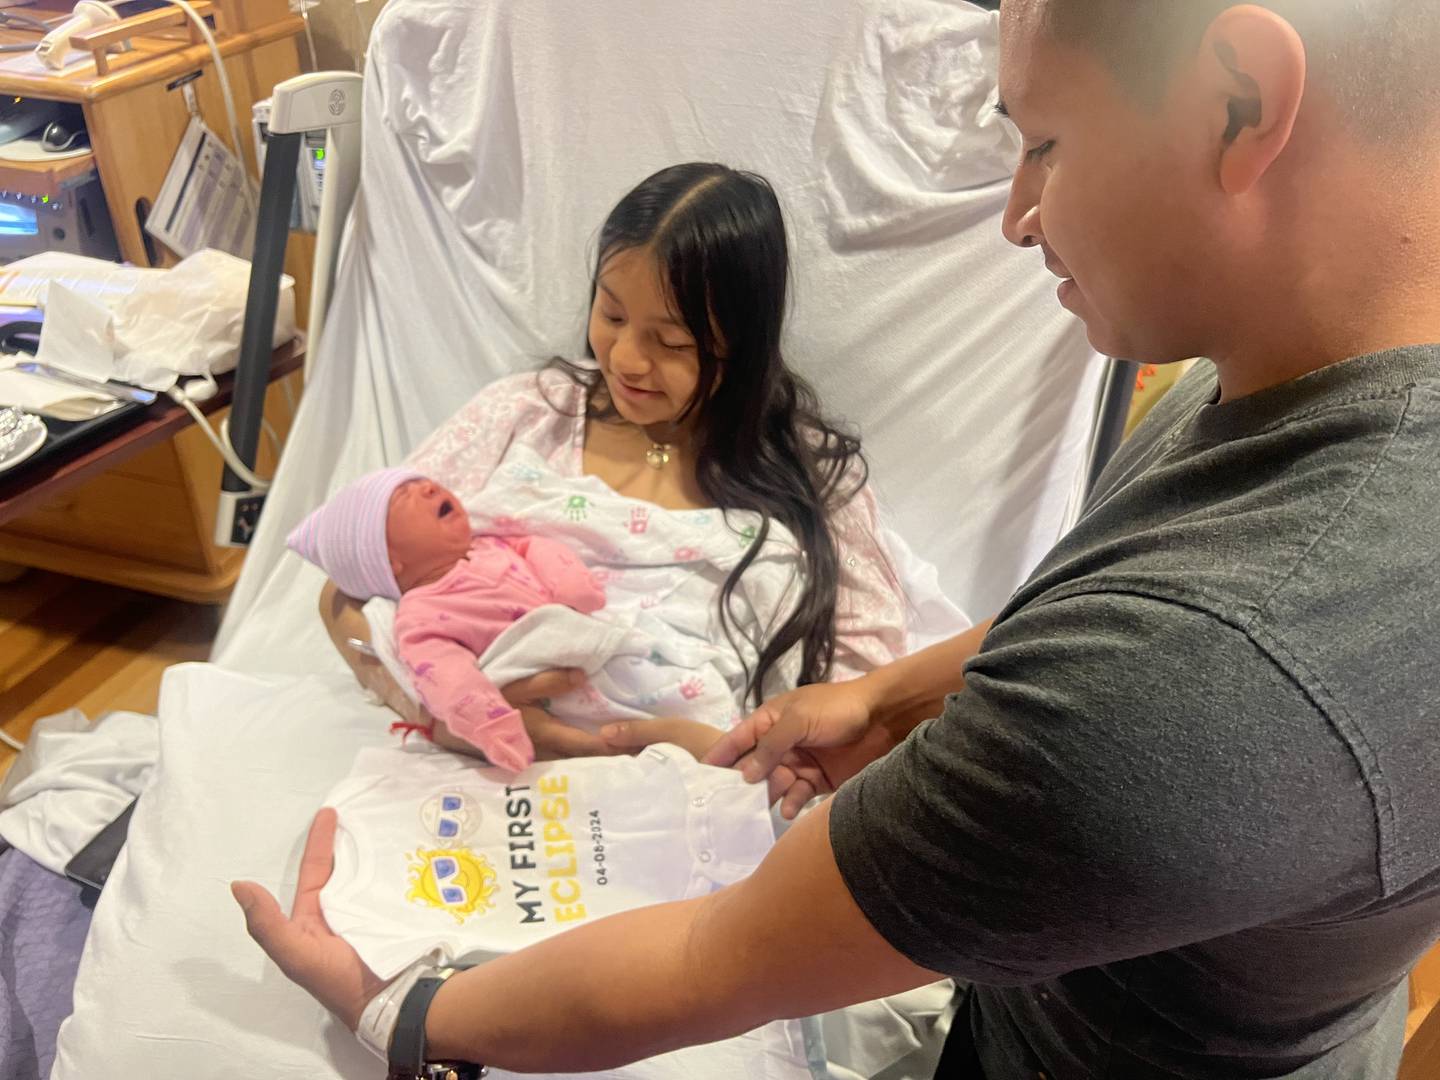 (From left) Arlinuelia’s daughter Leslie arrived at 11:49 a.m. on Monday, April 8, 2024, at Northwestern Medicine Kishwaukee Hospital in DeKalb, the day of the solar eclipse. Hospital nurses gifted the parents with a special eclipse onesie to mark the occasion.